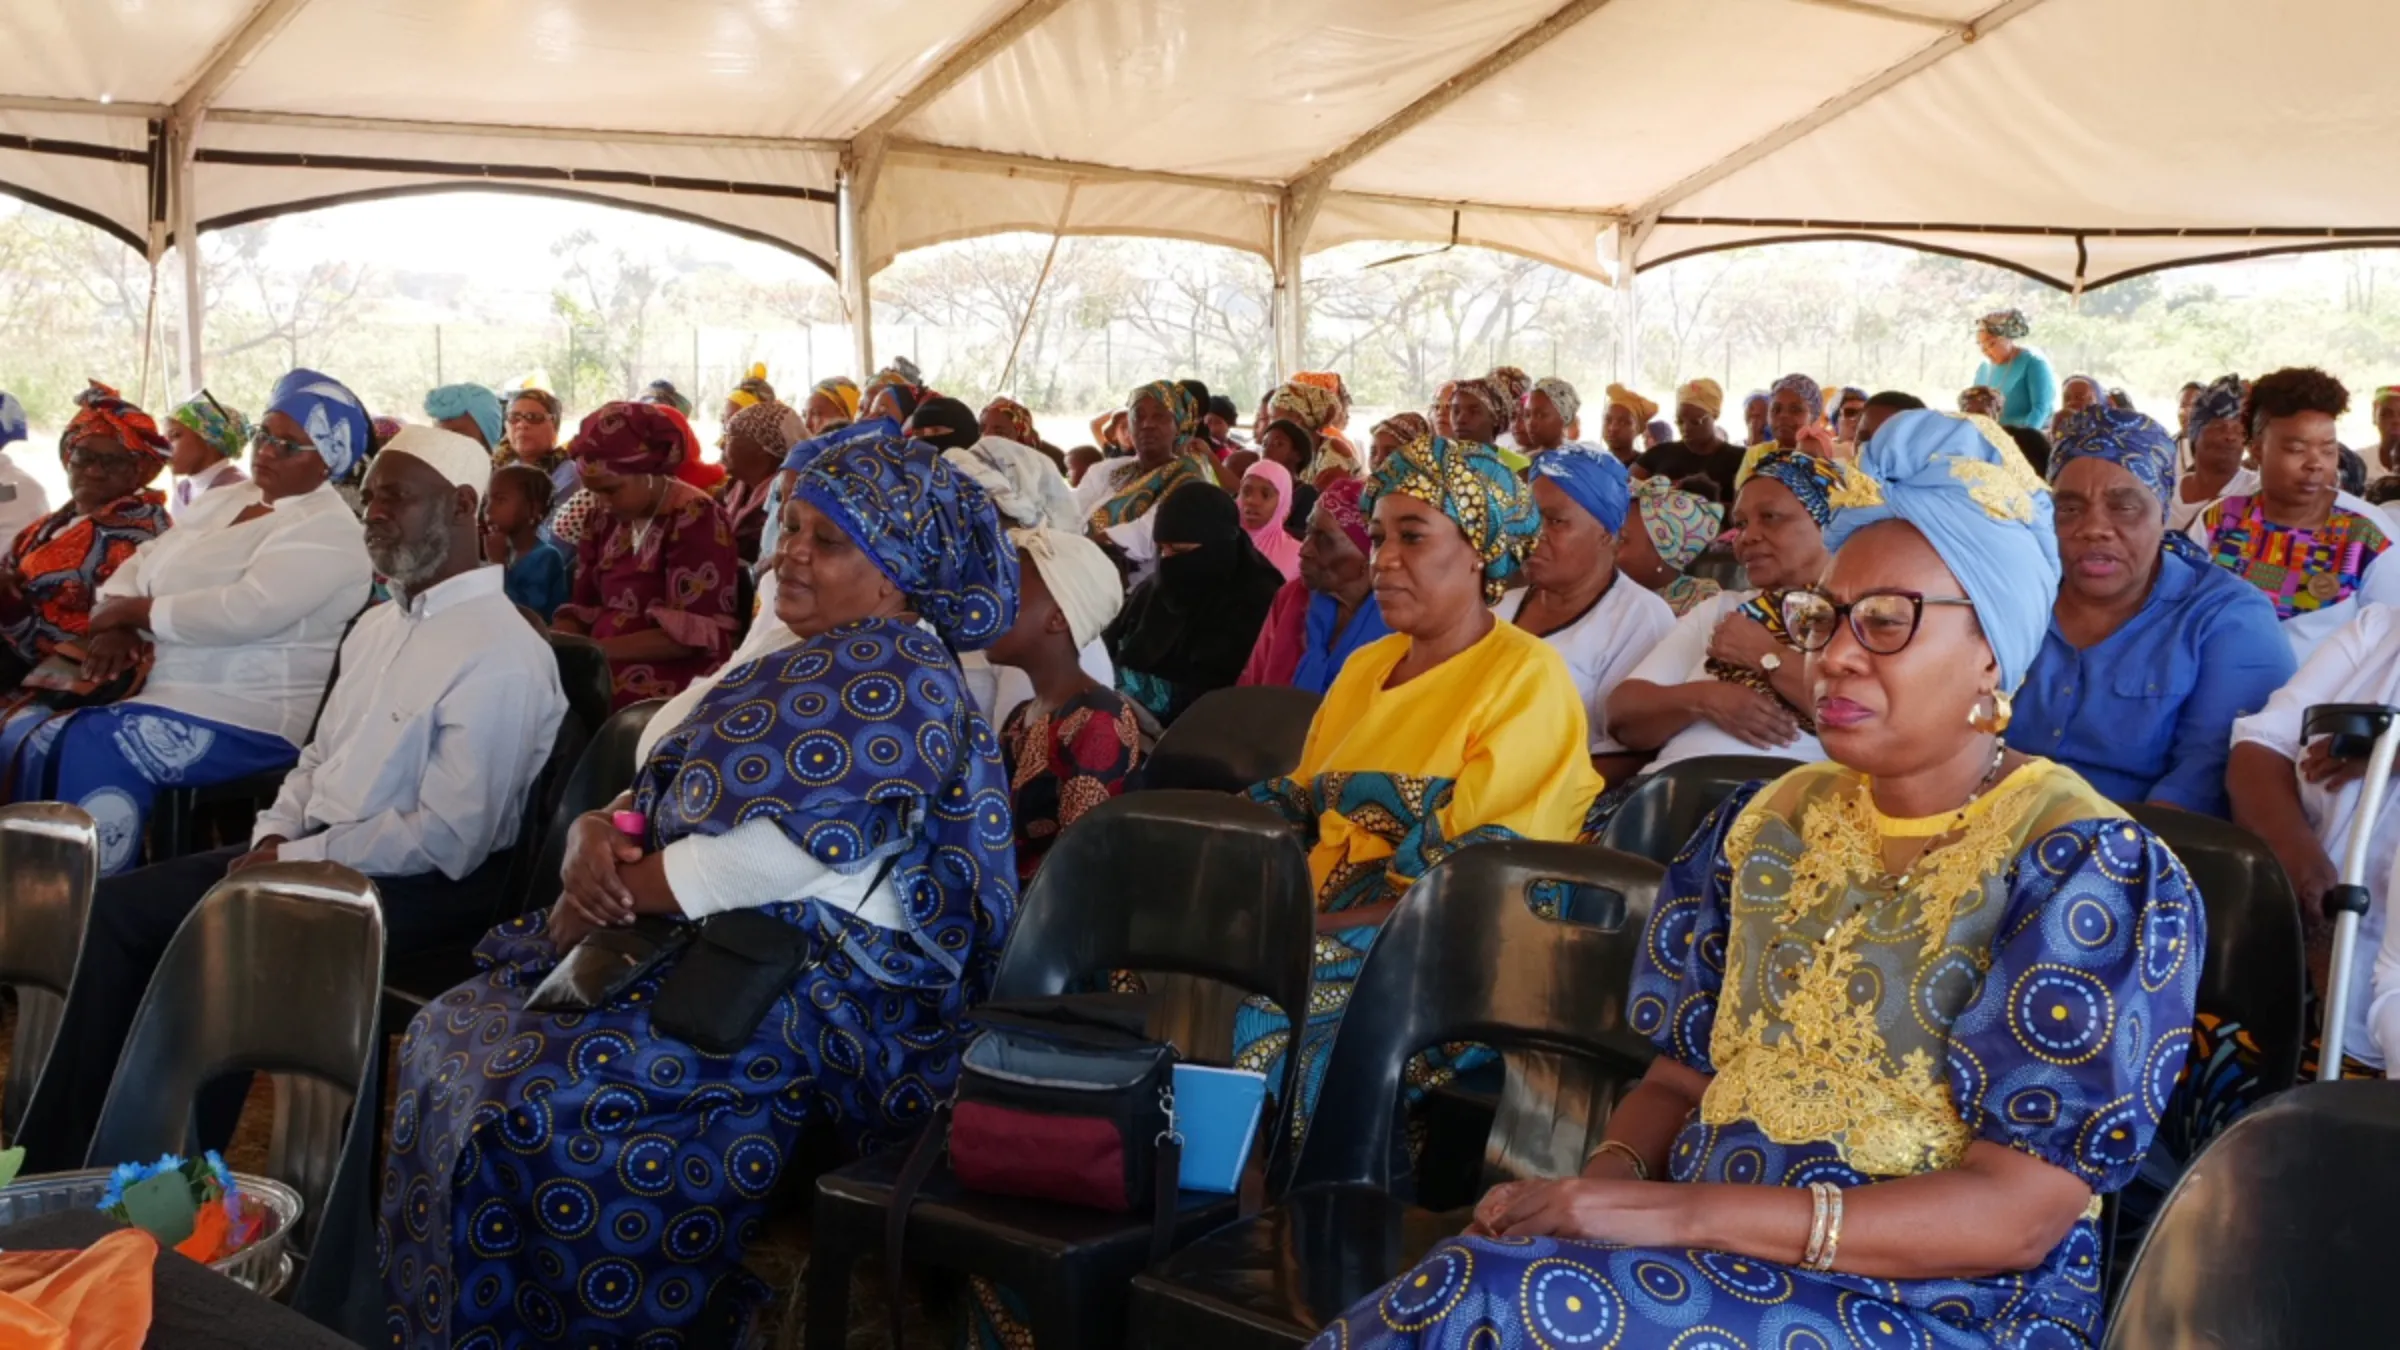 Amakua community members attend the cultural event celebrating their ancestors’ freedom from slavery 150 years prior in Chatsworth, Durban, South Africa, August 6, 2023